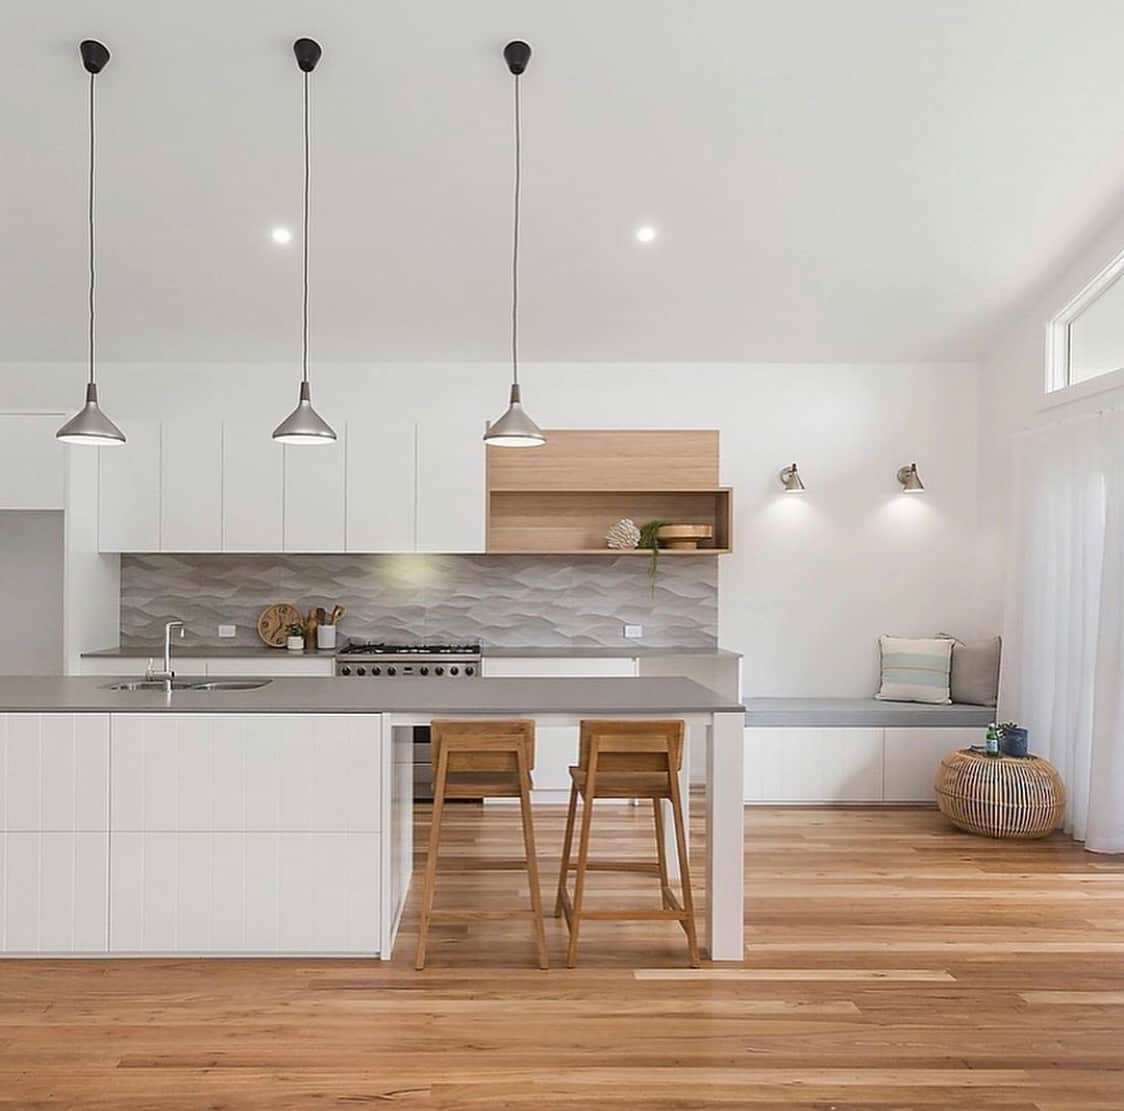 Kitchen After Renovation — Inovative Interiors In Cardiff, NSW